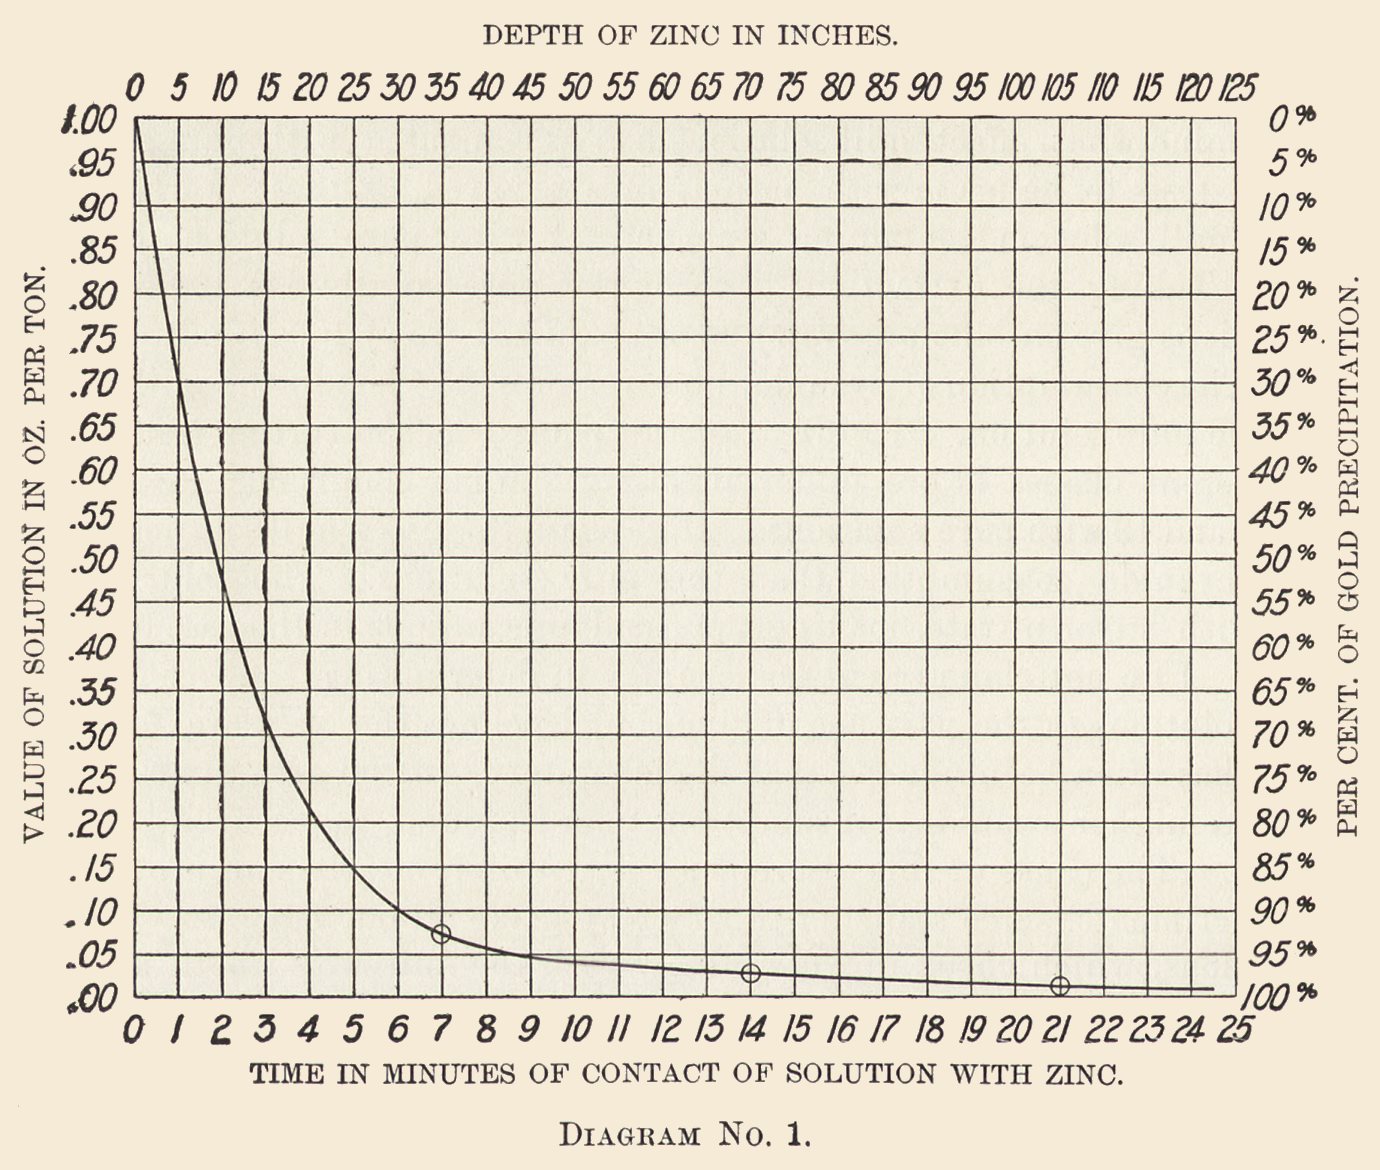 Diagram No. 1 Shows the Gold Precipitation as Deduced From Some Experiments